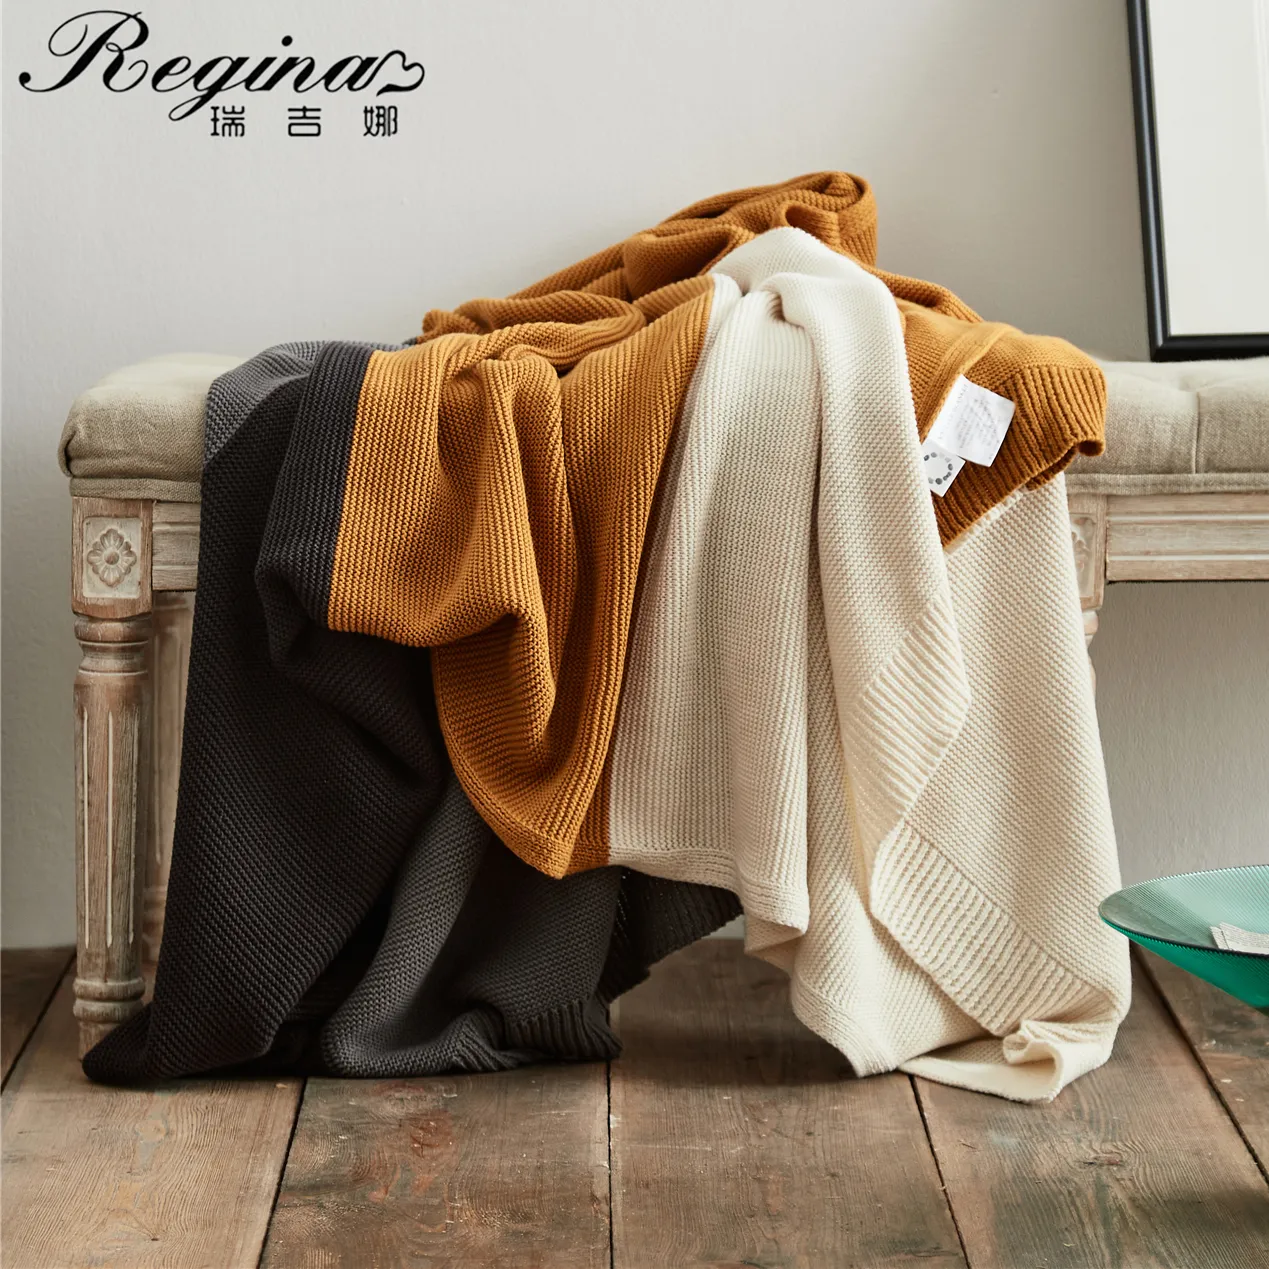 Contract Color Knitted Plaid Blankets Elegant Home Decoration Sofa Bed Soft Throws Cotton Fashion Office Nap Warm Blanket